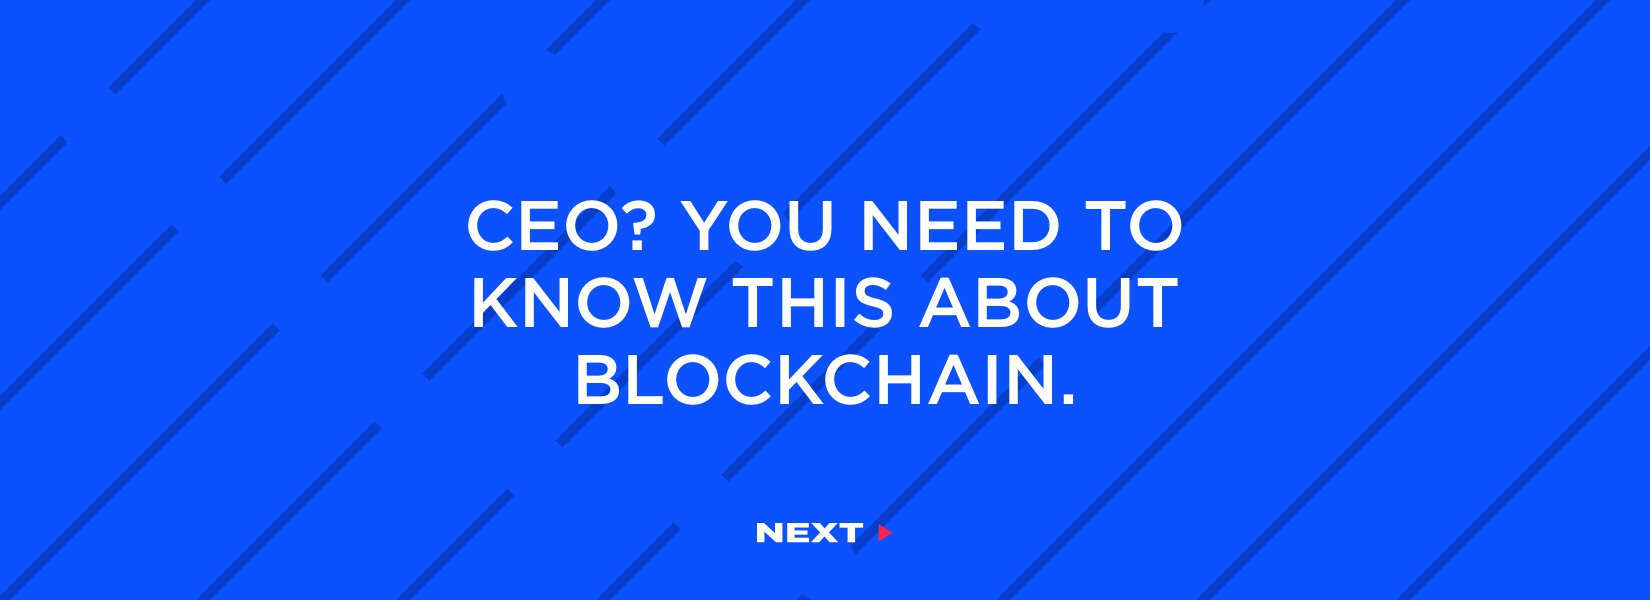 What you need to understand about blockchain as a CEO